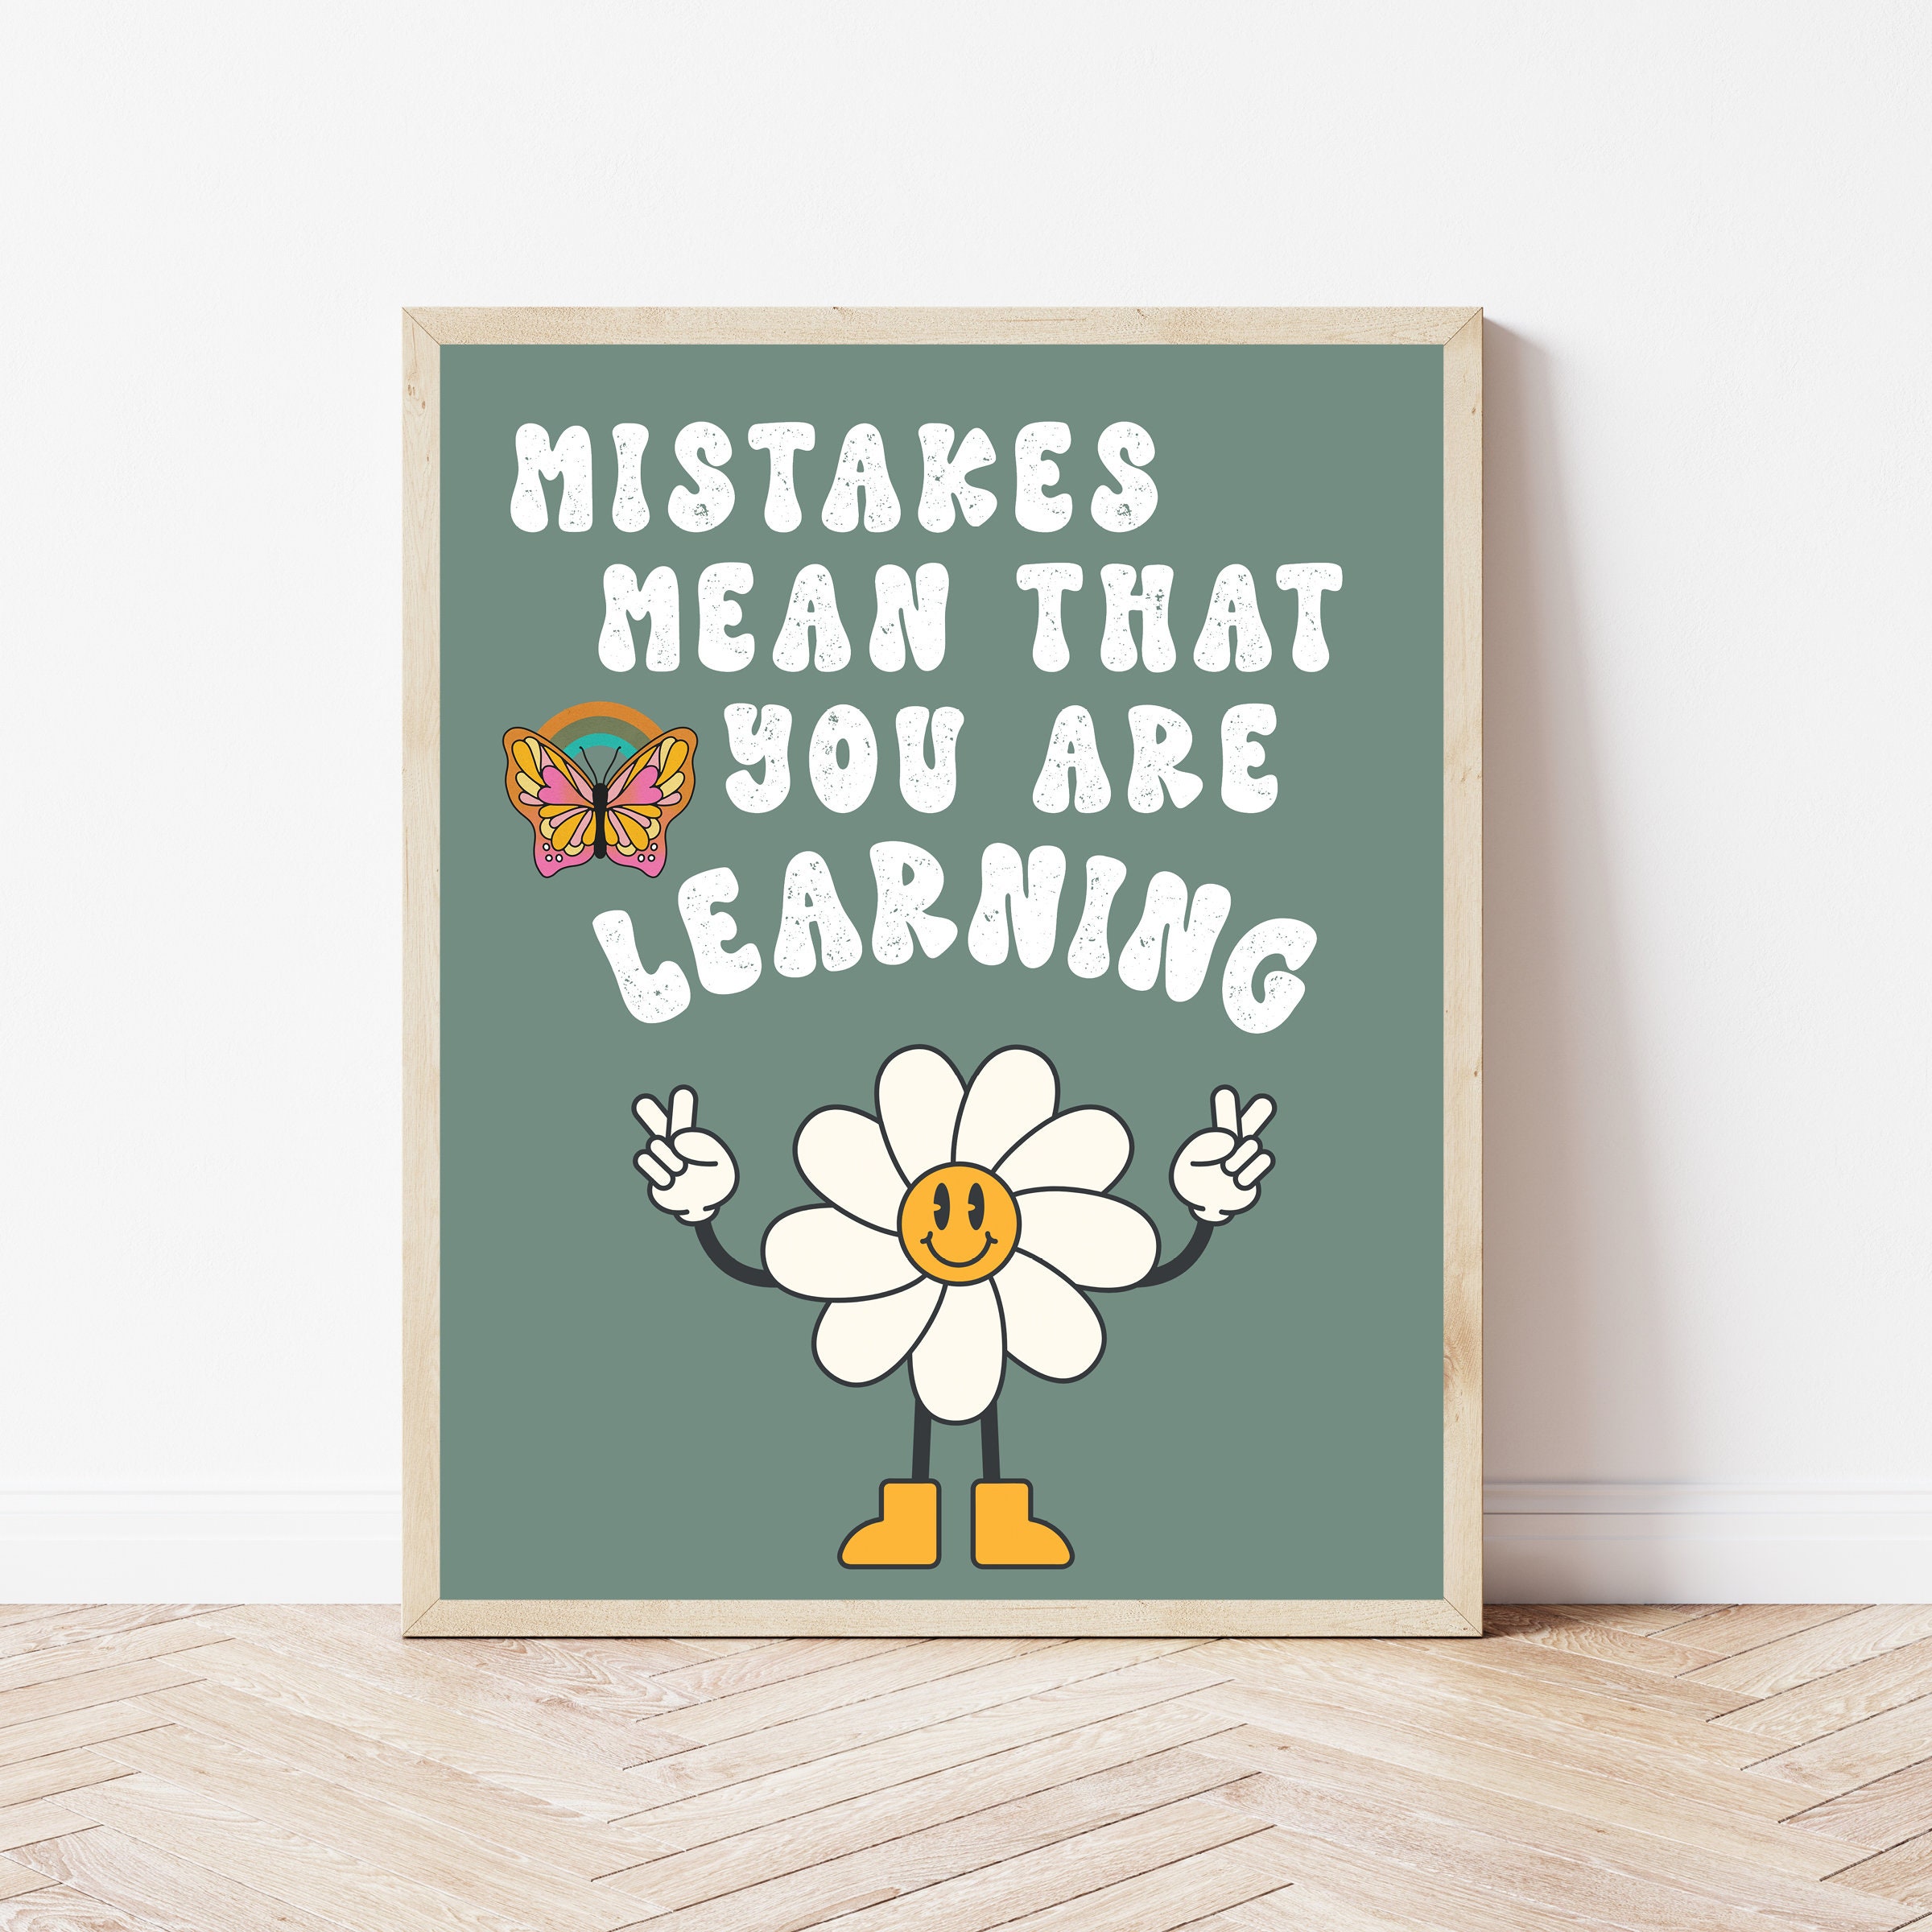 35+ Invaluable Lessons To Learn From The Mistakes